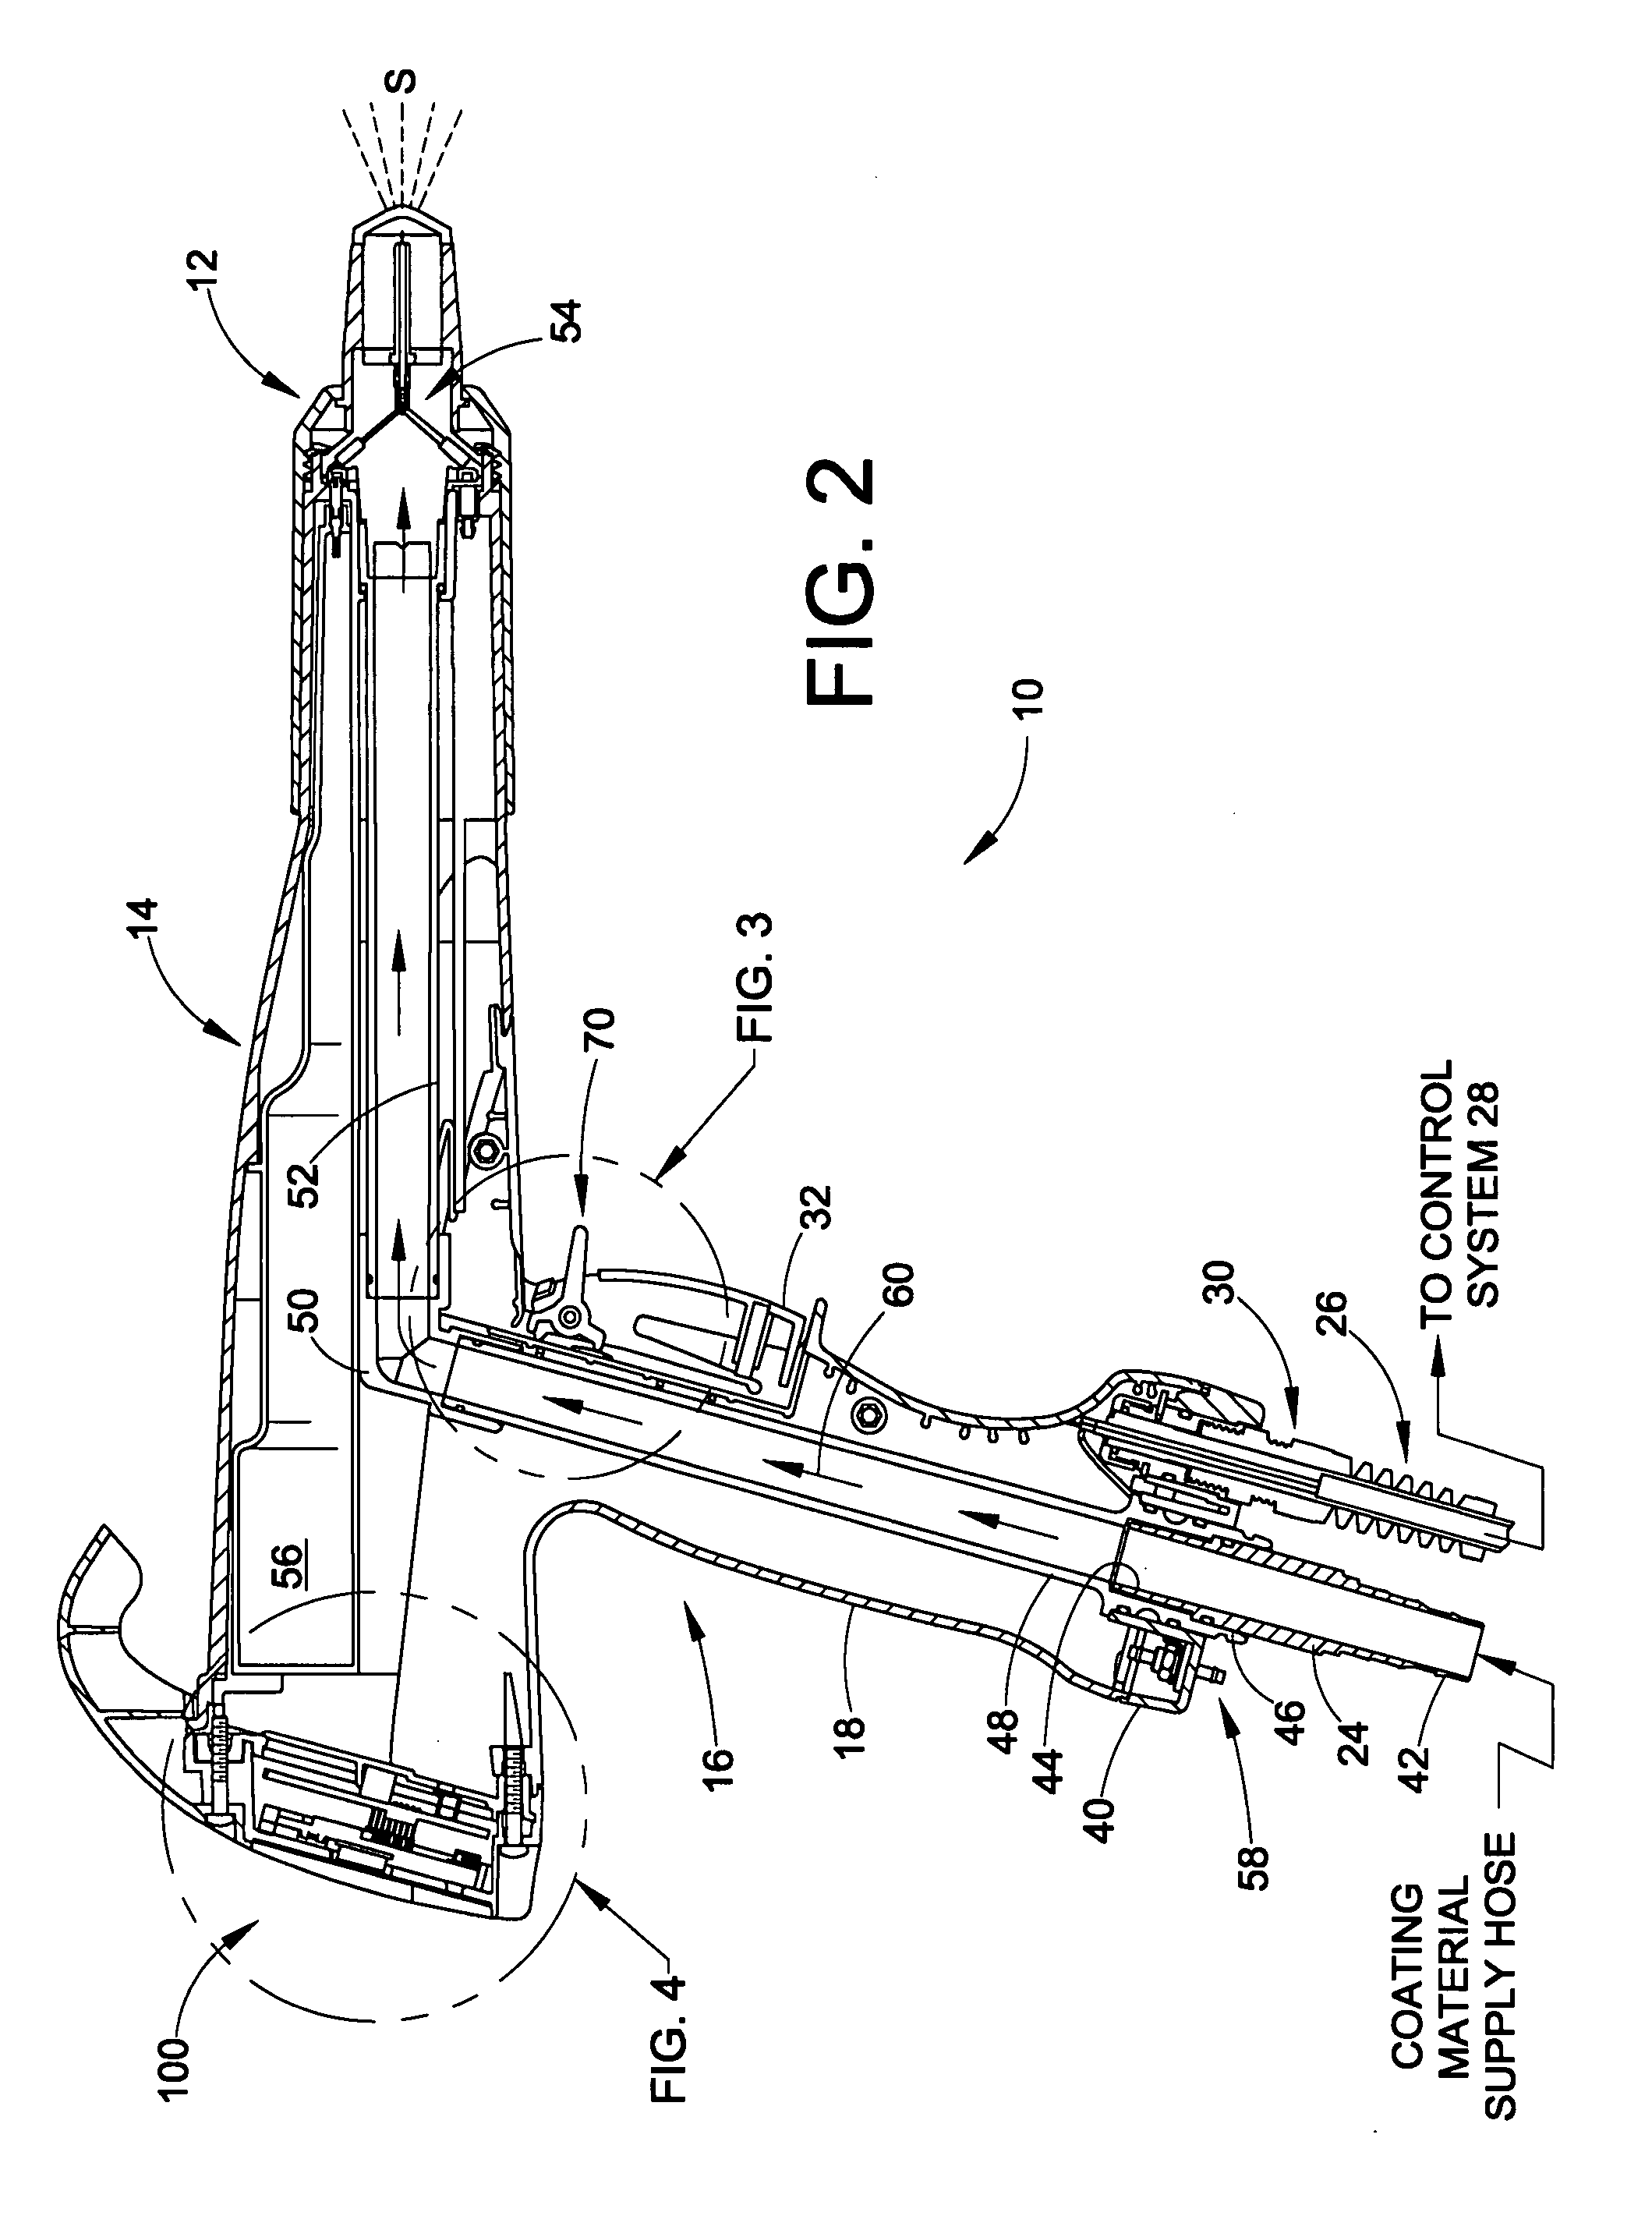 Apparatus and methods for controlling material application device